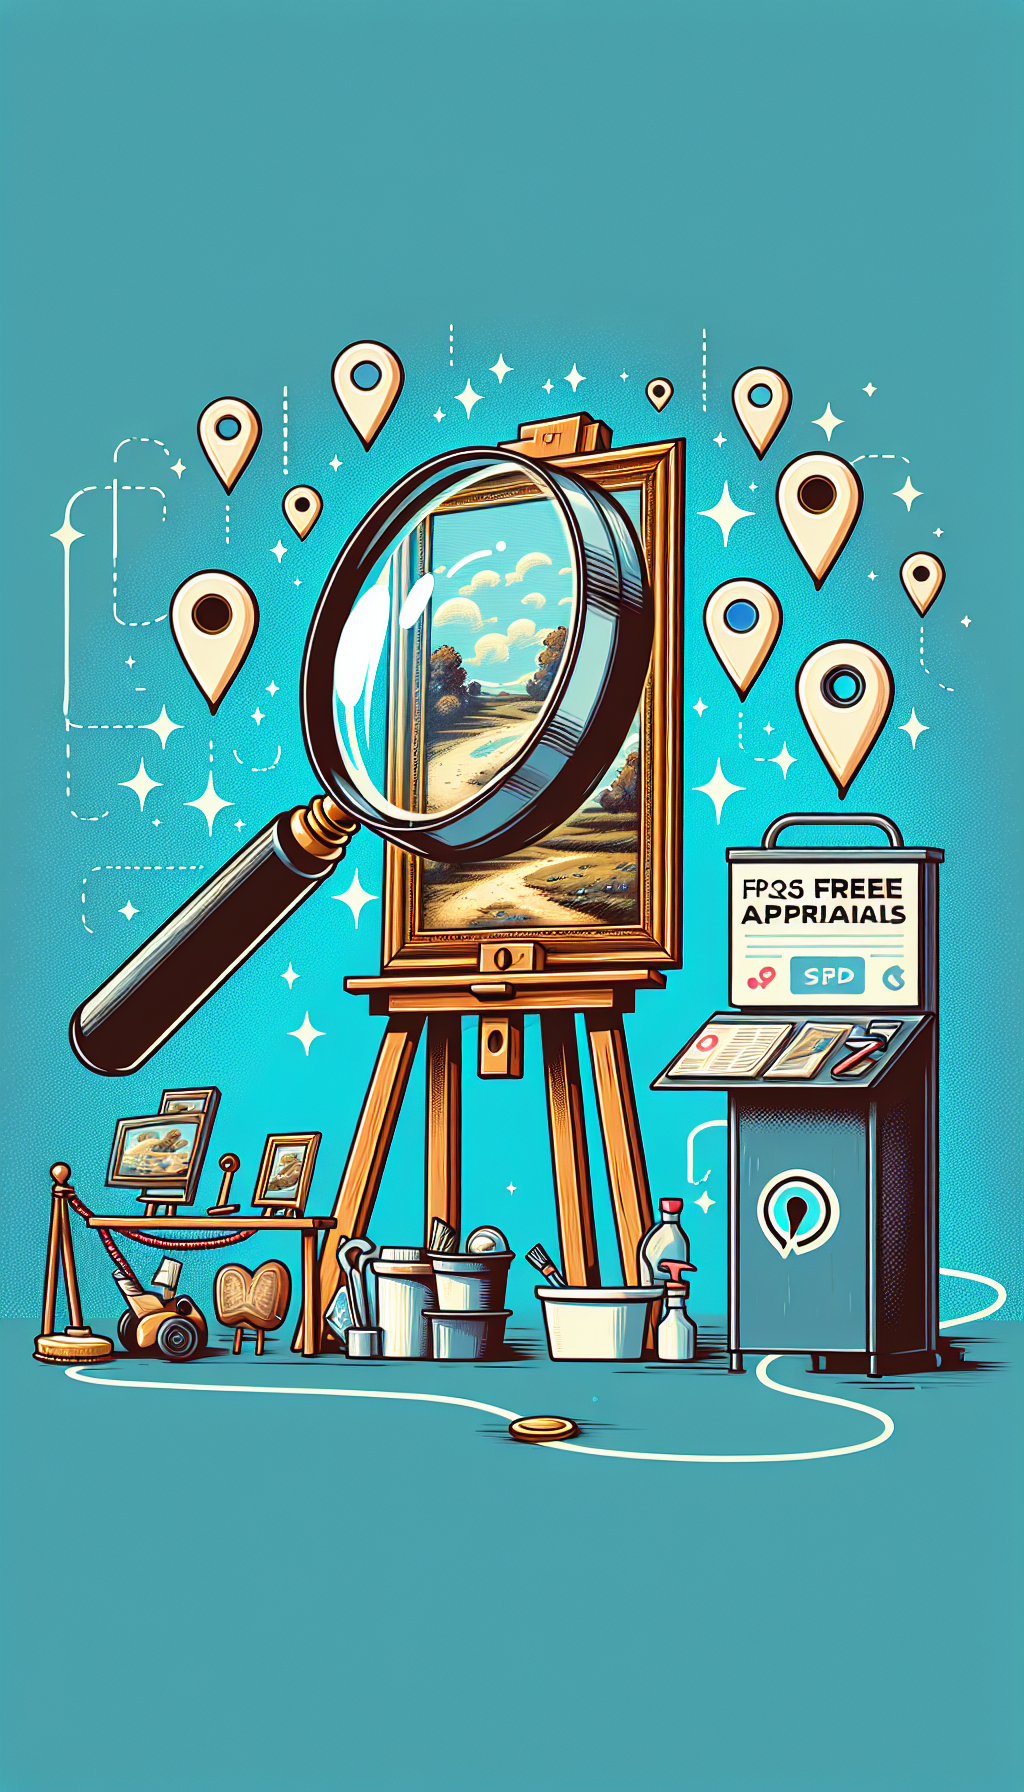 An illustration shows a magnifying glass hovering over a classic canvas on an easel, with cartoonish sparkle and cleaning tools nearby, hinting at preparations for examination. GPS pins float above, forming a trail to the 'Free Appraisals' booth in the background, with a line of diverse artworks awaiting their turn, encapsulating the journey of finding local appraisal services.